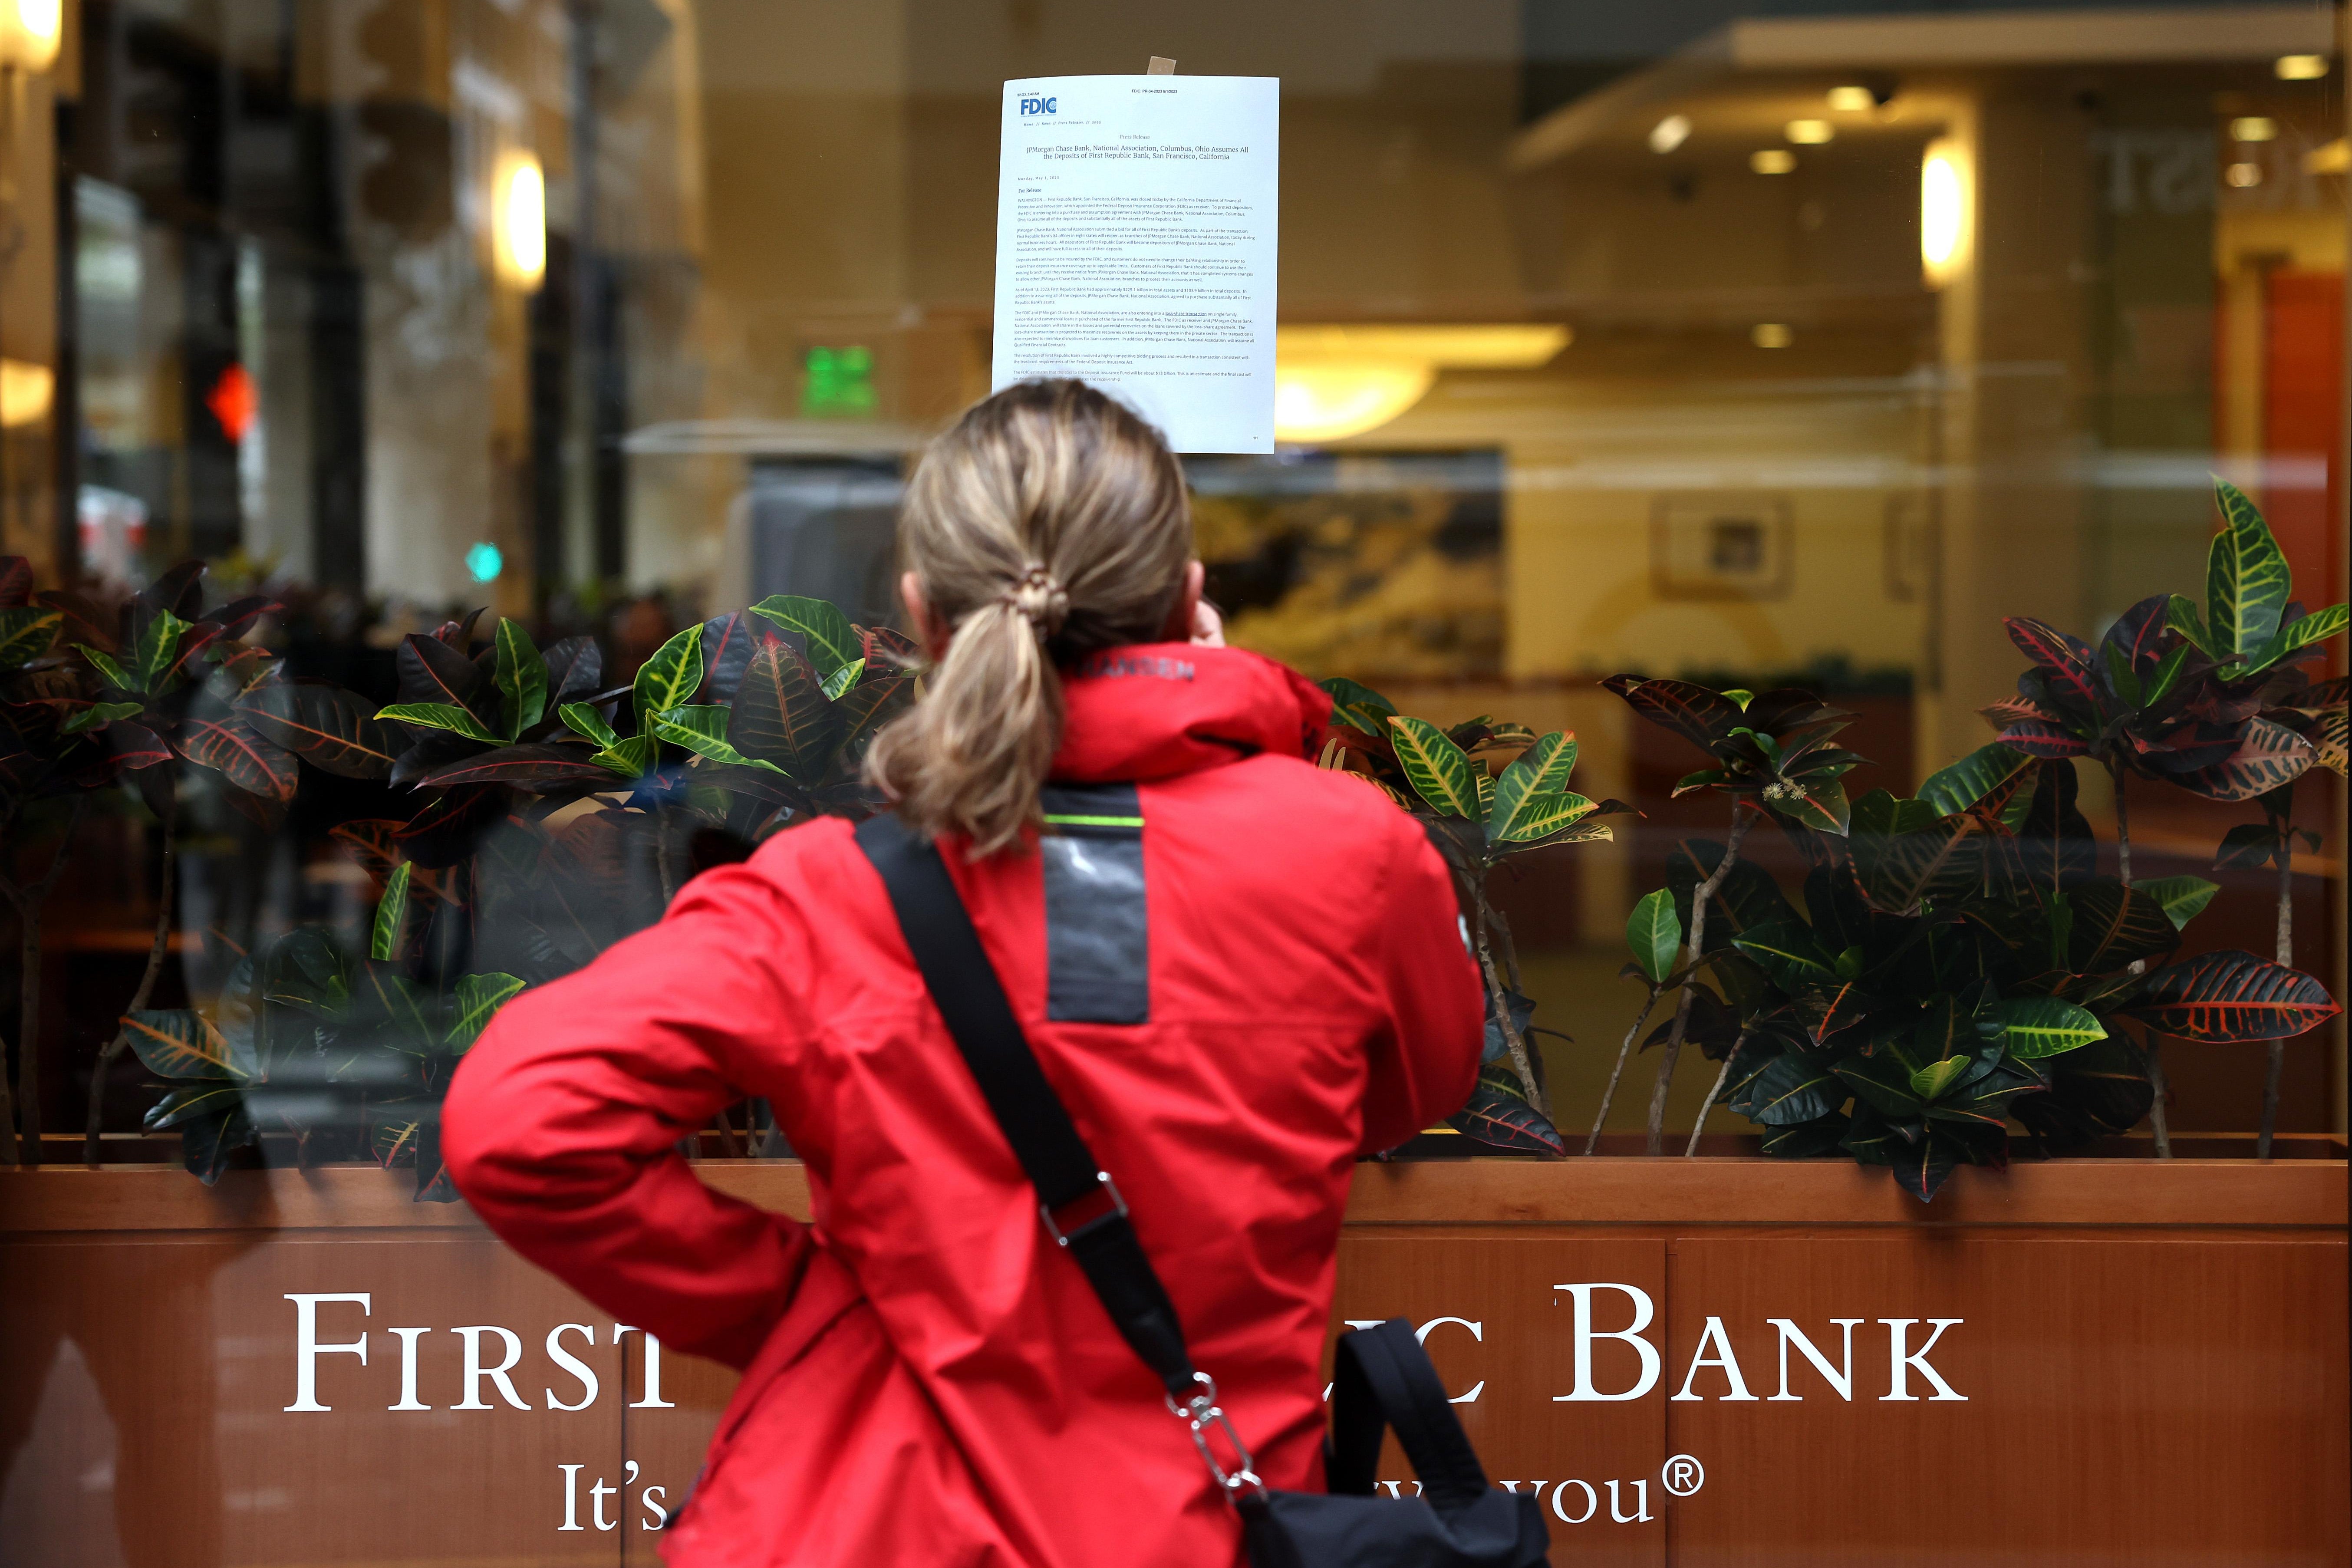 SAN FRANCISCO, CALIFORNIA - MAY 01: A passerby stops to read a posted announcement from the FDIC about the seizure of First Republic Bank and sale to JPMorgan Chase on May 01, 2023 in San Francisco, California. Federal Regulators seized troubled lender First Republic Bank on Monday and sold all of its deposits and most of its assets to JPMorgan Chase. First Republic becomes the second largest bank in U.S. history to fail since Washington Mutual failed in 2008. (Photo by Justin Sullivan/Getty Images)